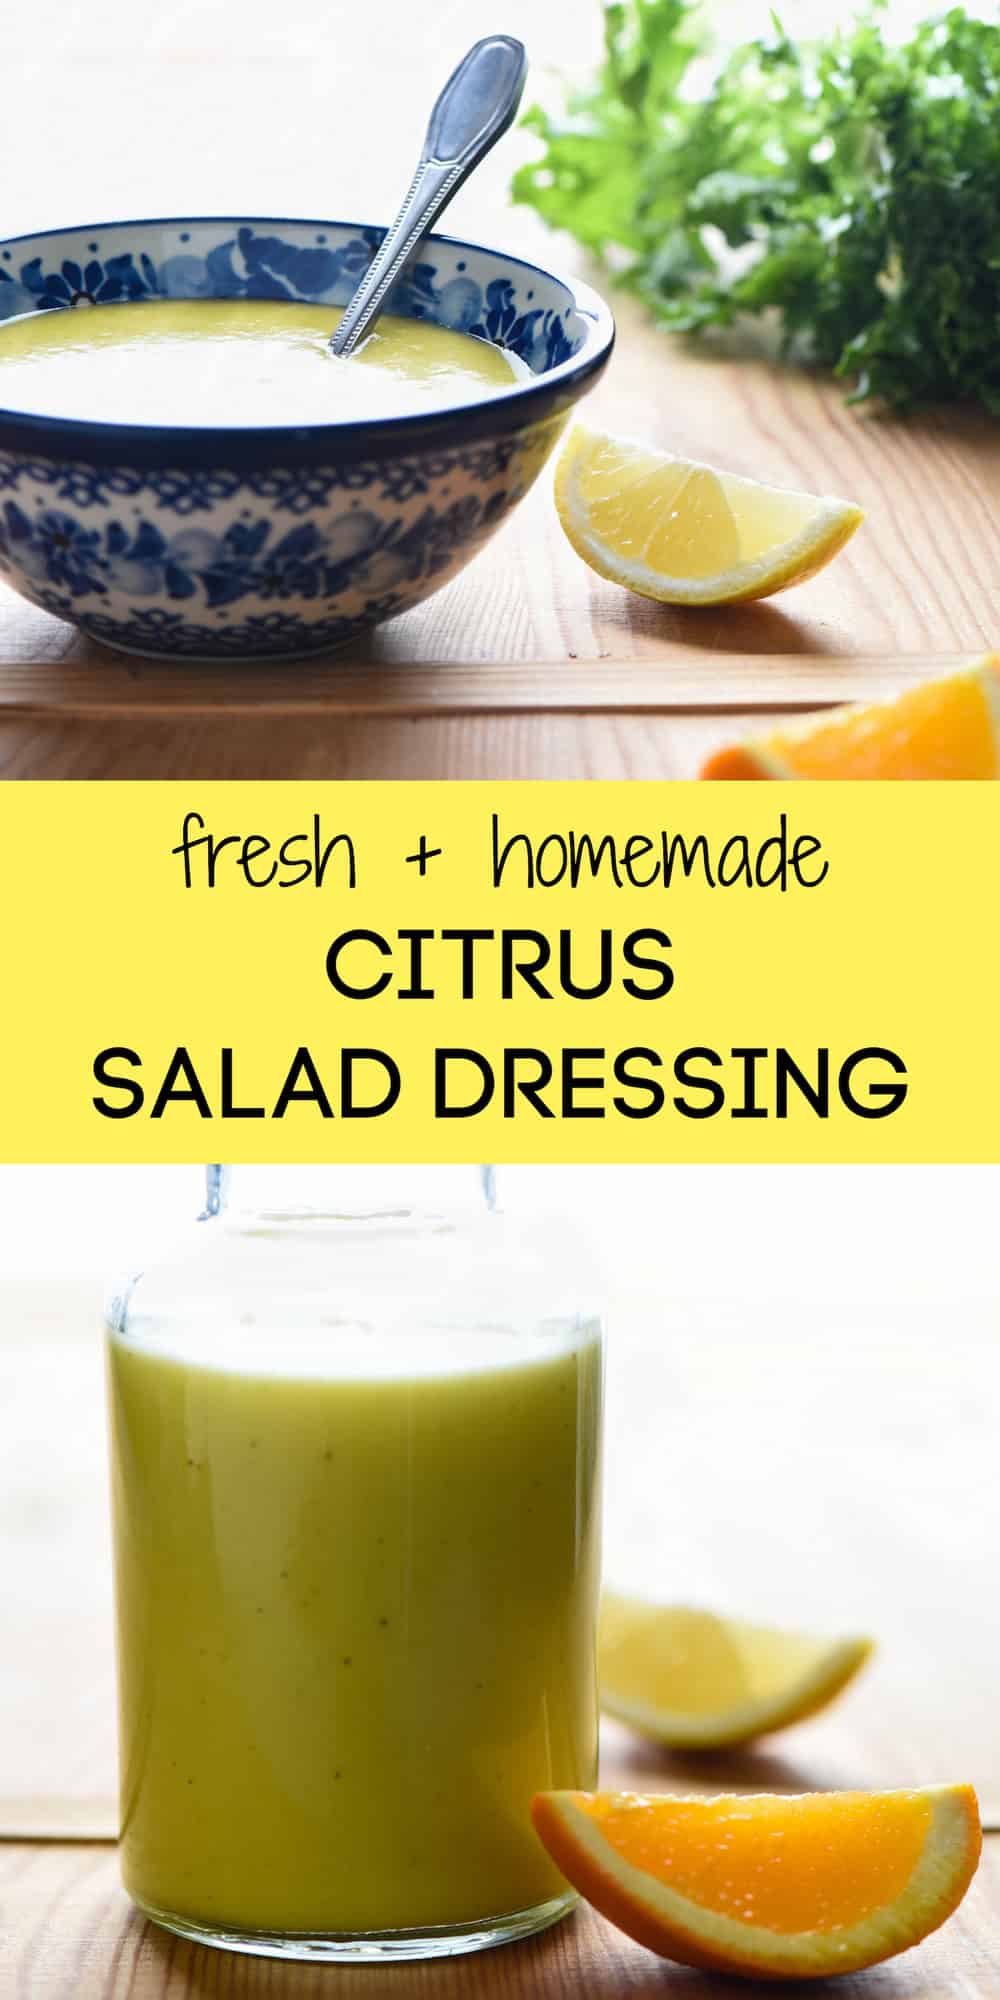 Forget store bought salad dressing. This homemade Citrus Salad Dressing recipe takes just 5 minutes and will be healthier, fresher and more delicious. | foxeslovelemons.com